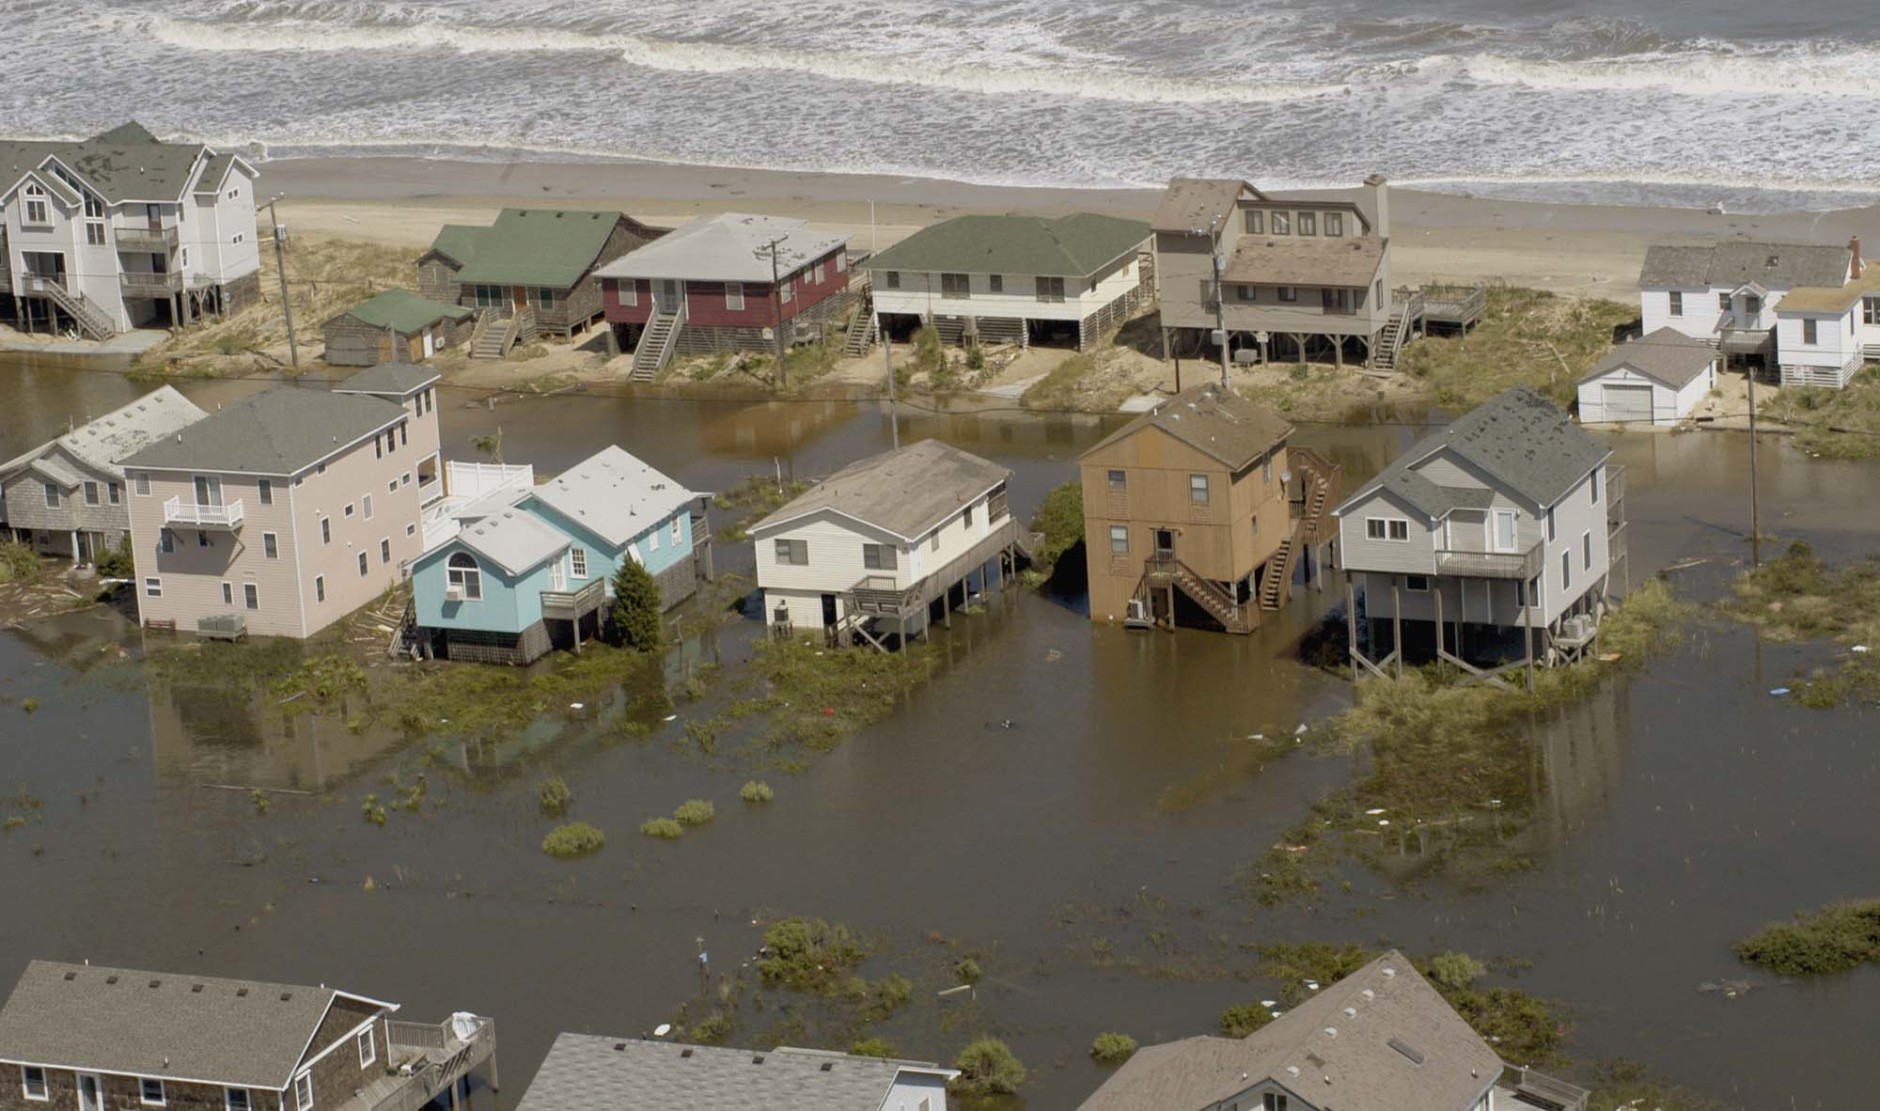 Standing water remains around these homes near Kill Devil Hills, N.C., Friday, Sept. 19, 2003, in this photo taken from the helicoptor which gave North Carolina Gov. Mike Easley a tour of the area hit by Hurricane Isabel. (AP Photo/Karen Tam)